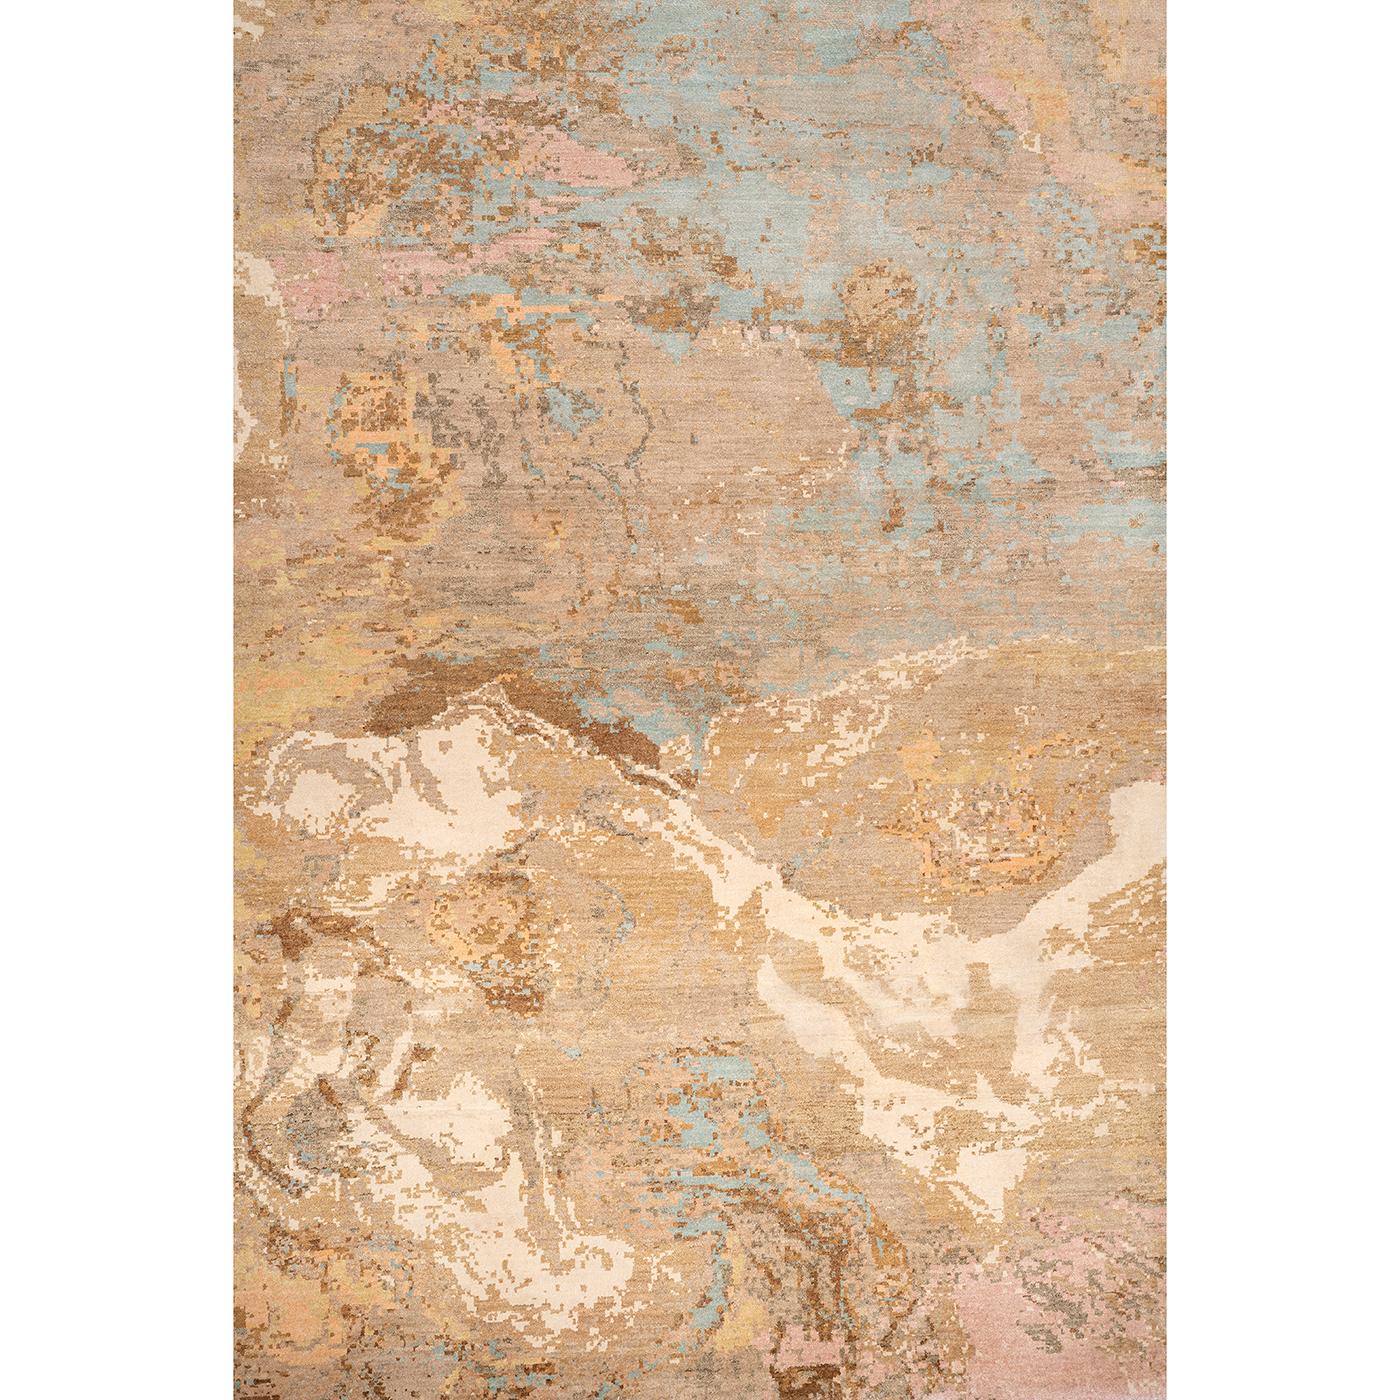 The beautifully crafted Clouds Rug is made in India using the Iranian 10 by 10 knotting technique (100 knots per square inch). With the pile in pure 100% Chinese silk, and the warp and weft in cotton, the coloring in this version features beige and